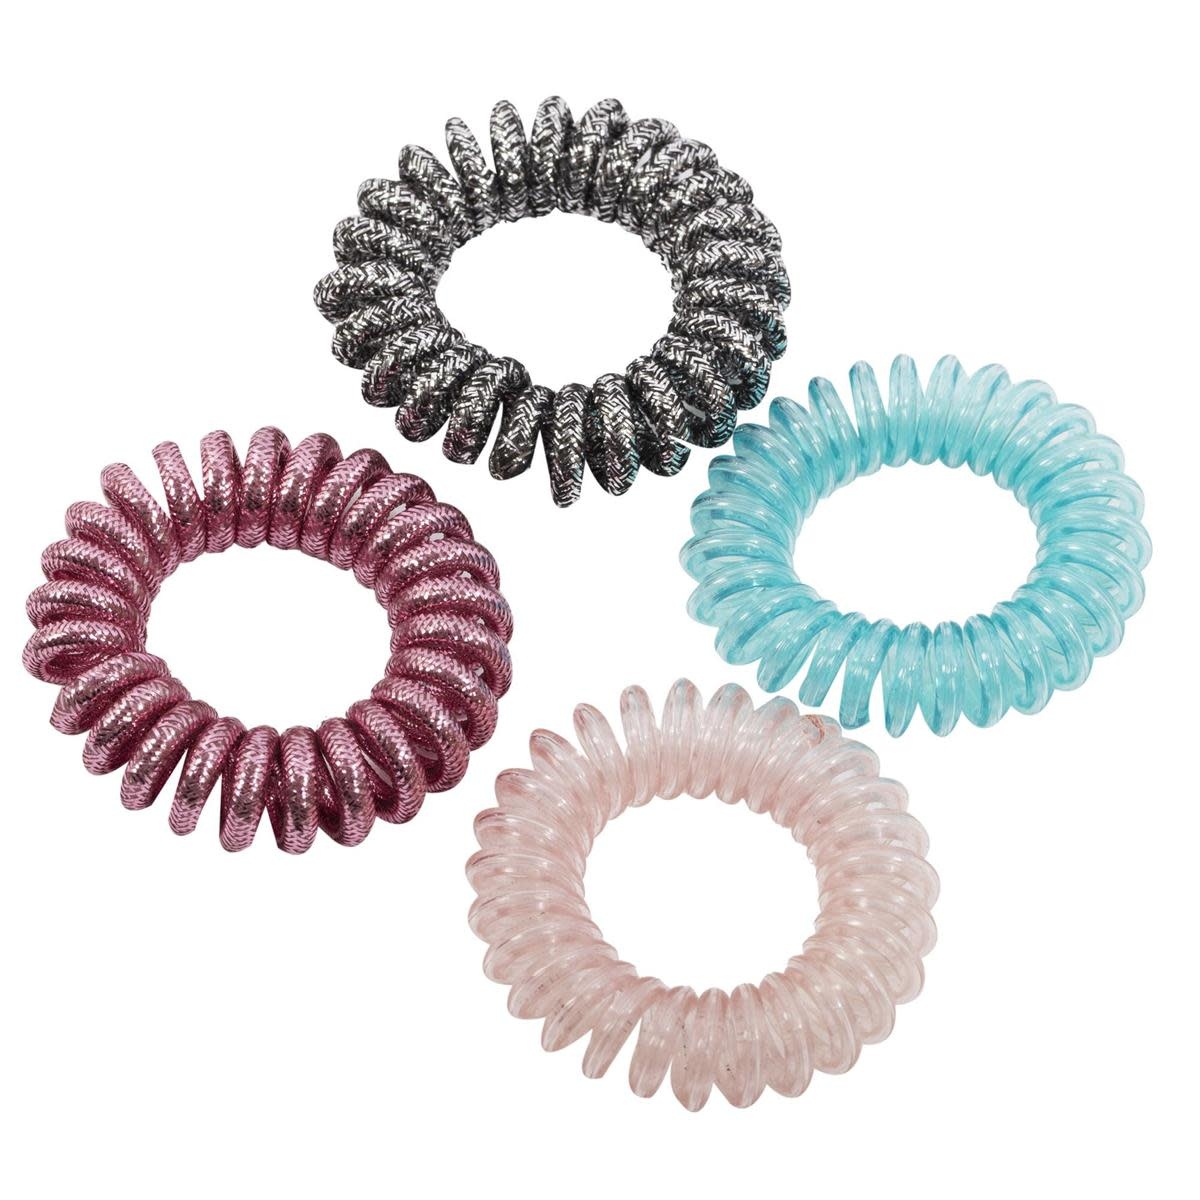 Coil Hair Ties Stylin' 77826, 4 by package